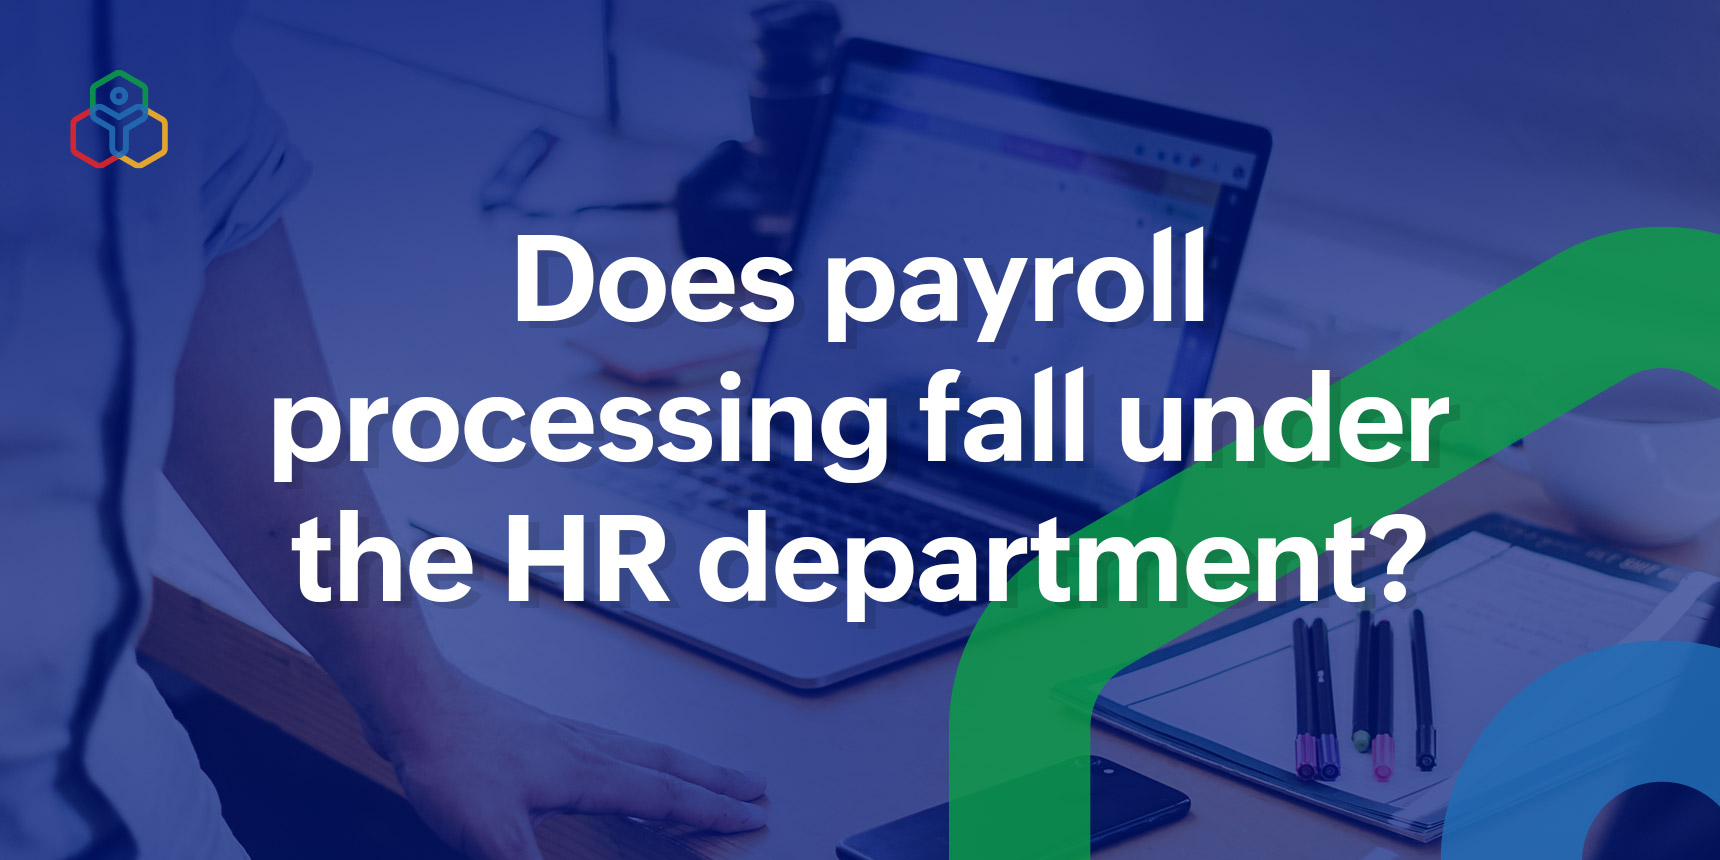 Is Payroll part of HR?